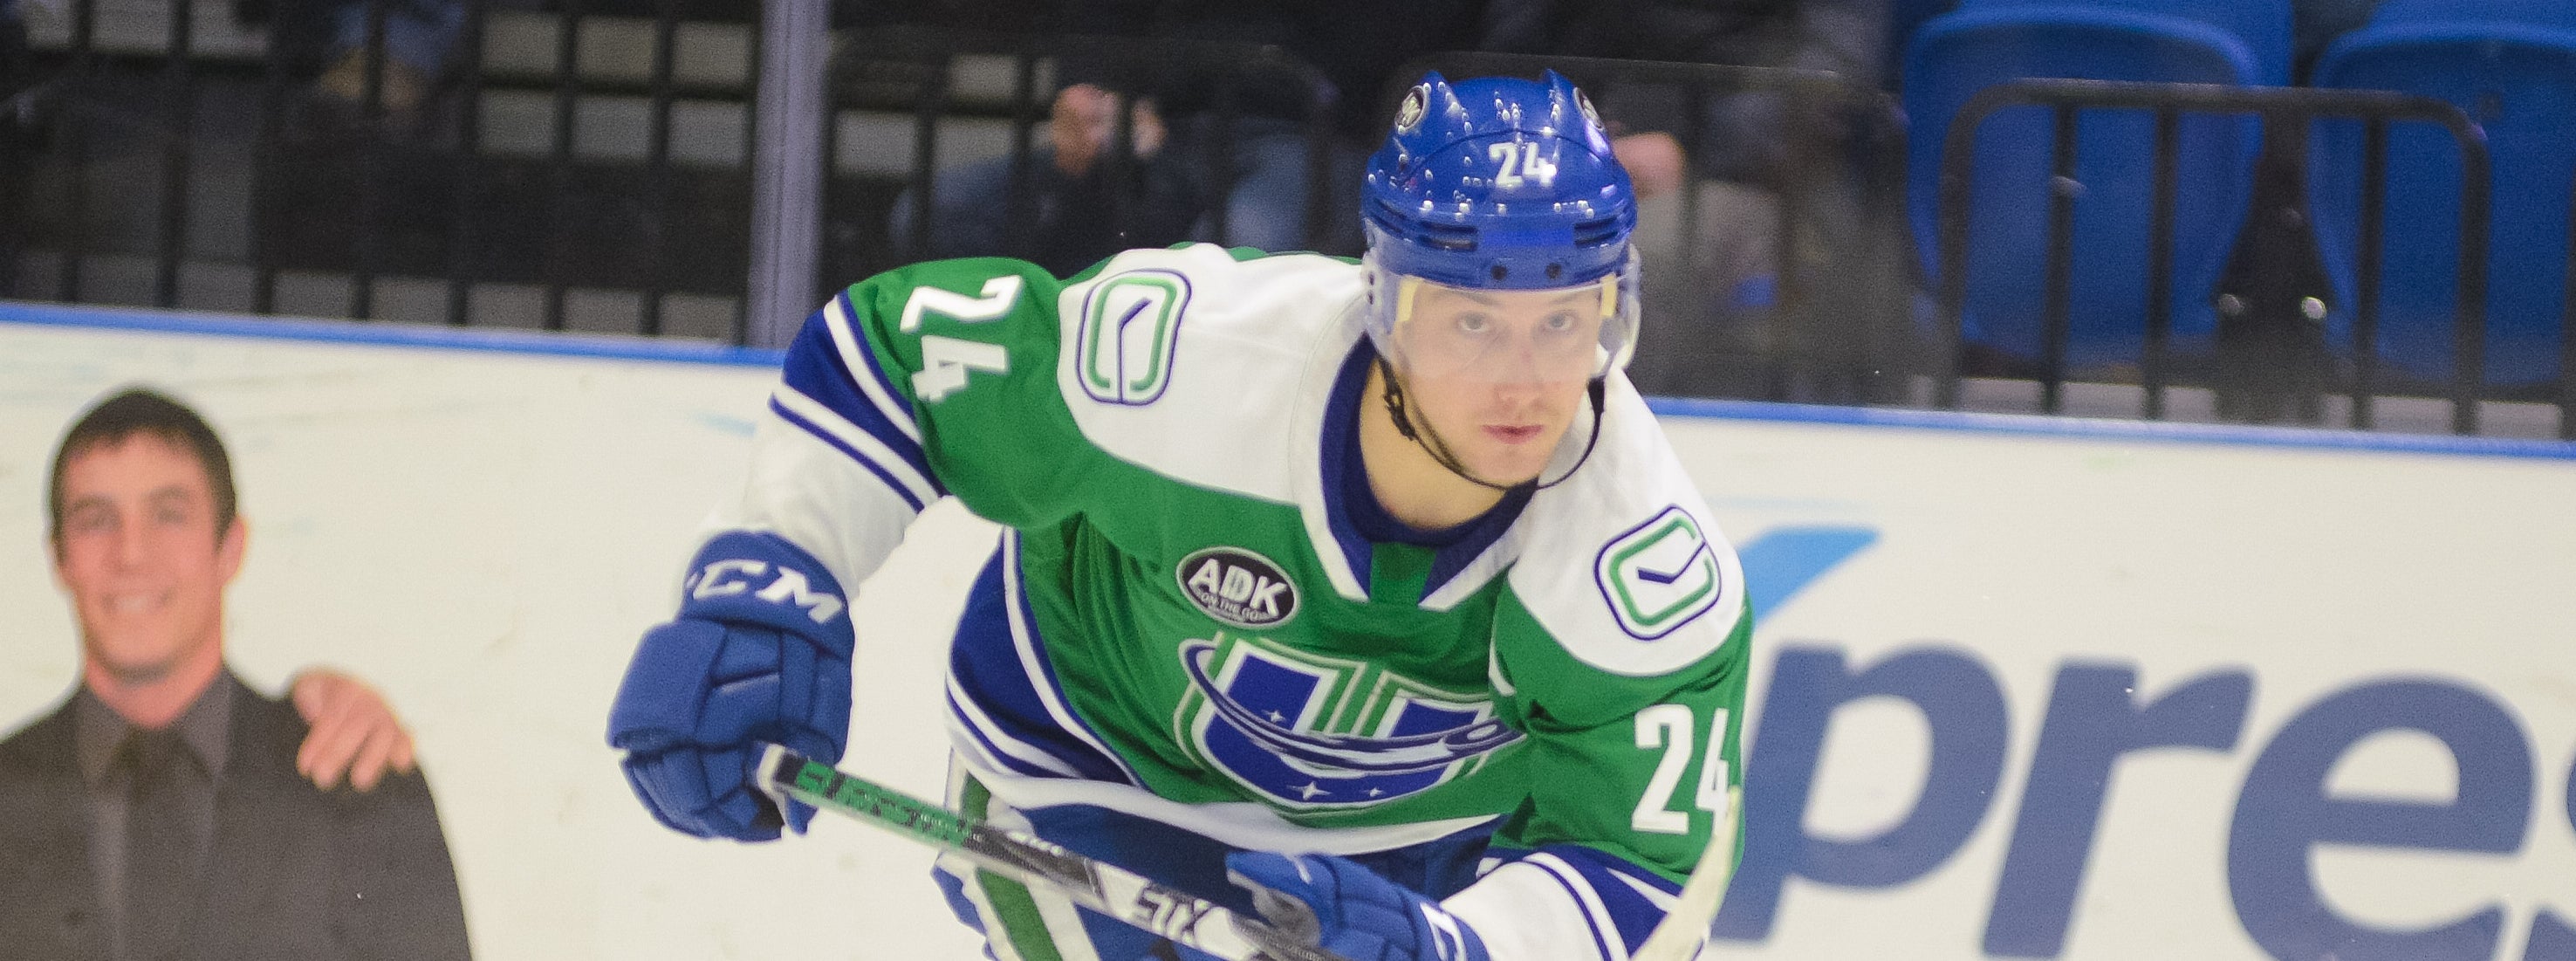 COMETS RETURN FROM HOLIDAY BREAK TO BATTLE BEARS